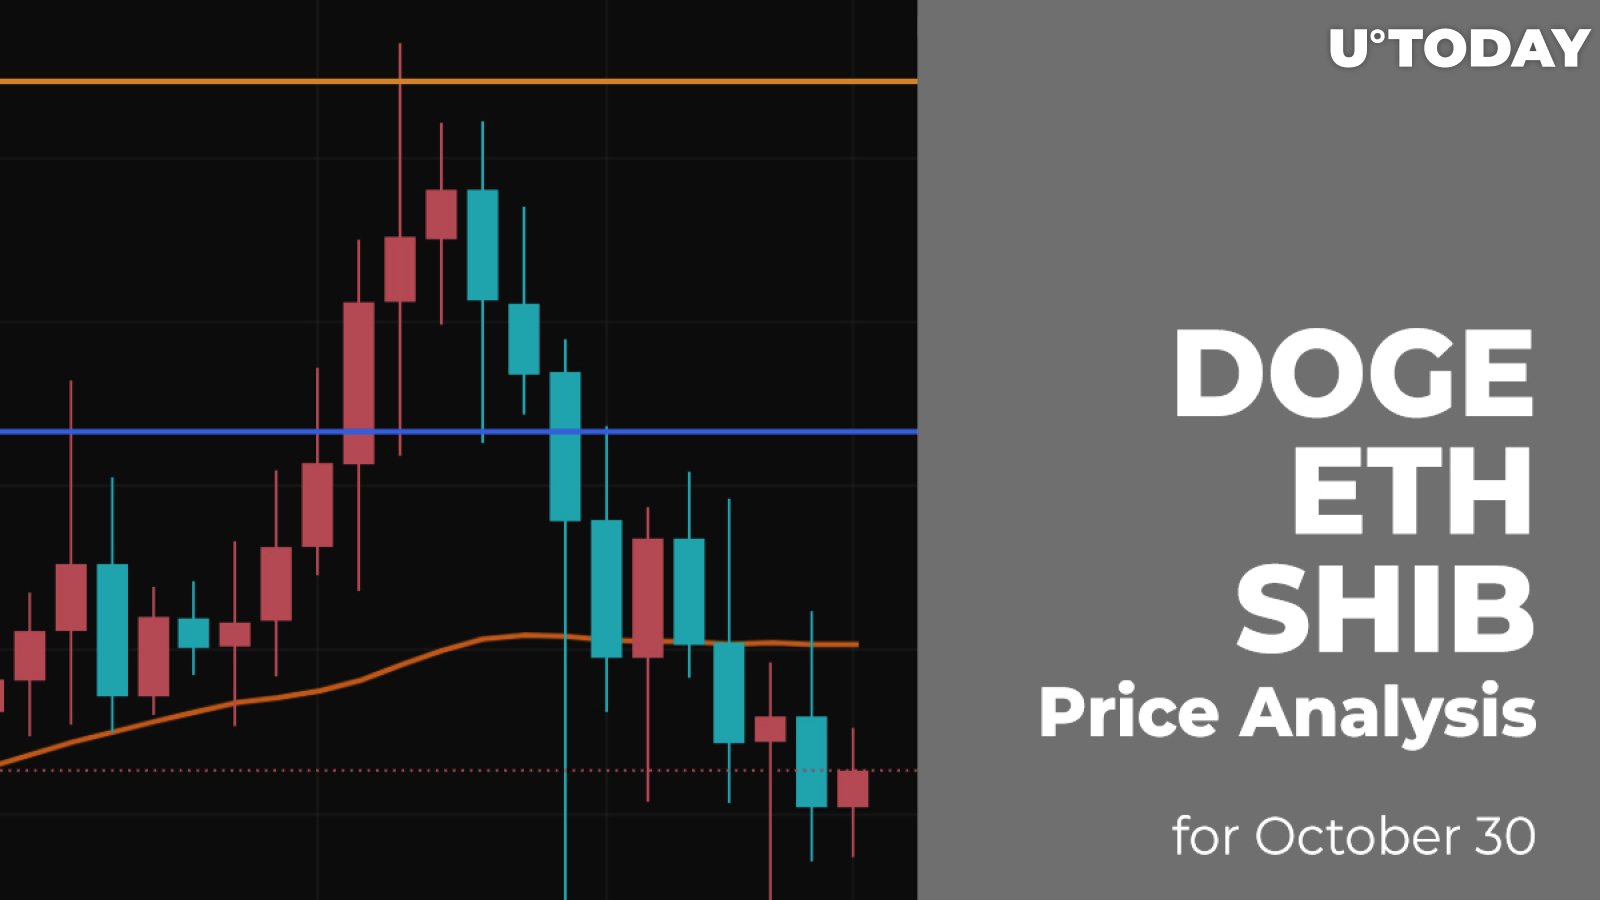 DOGE, ETH and SHIB Price Analysis for October 30